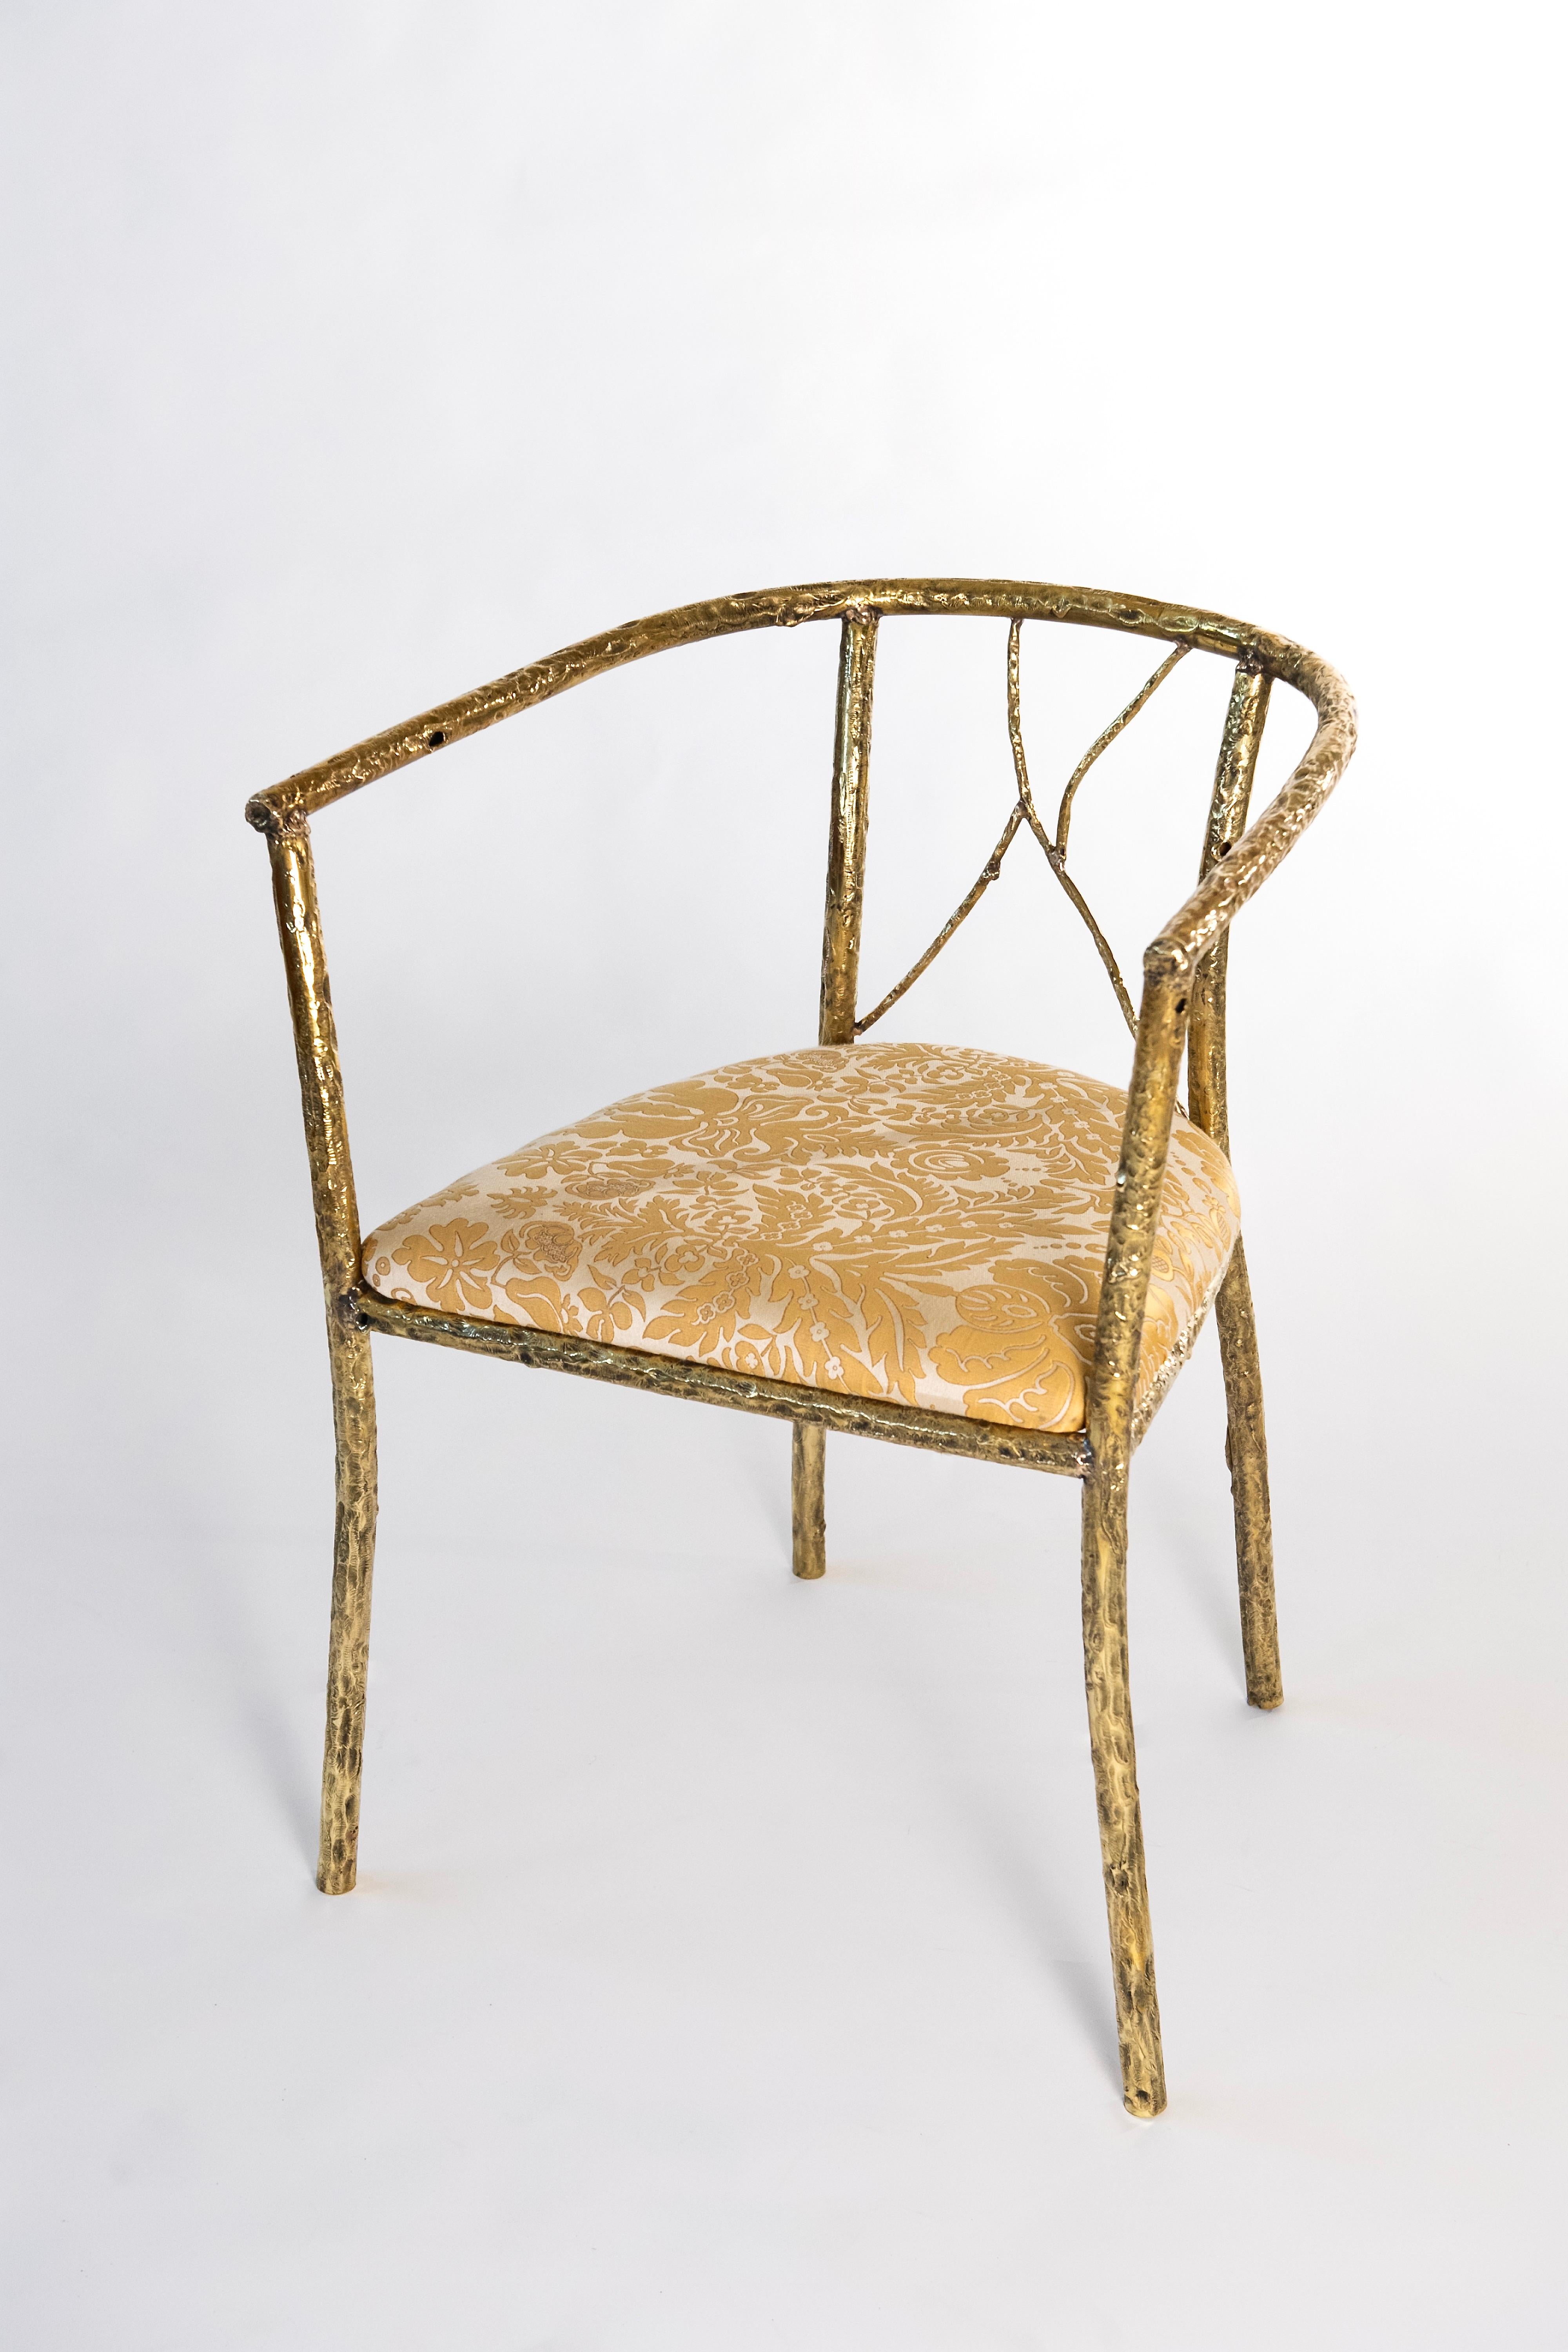 Branches chair by Samuel Costantini
Entirely handmade by the artist
Edition 12 + 1 AP
Measures: W 50 x D 50 x H 75 cm
Materials: Curved brass, welded and worked on flame then polished

Like curved vine branches, the structure of the chair